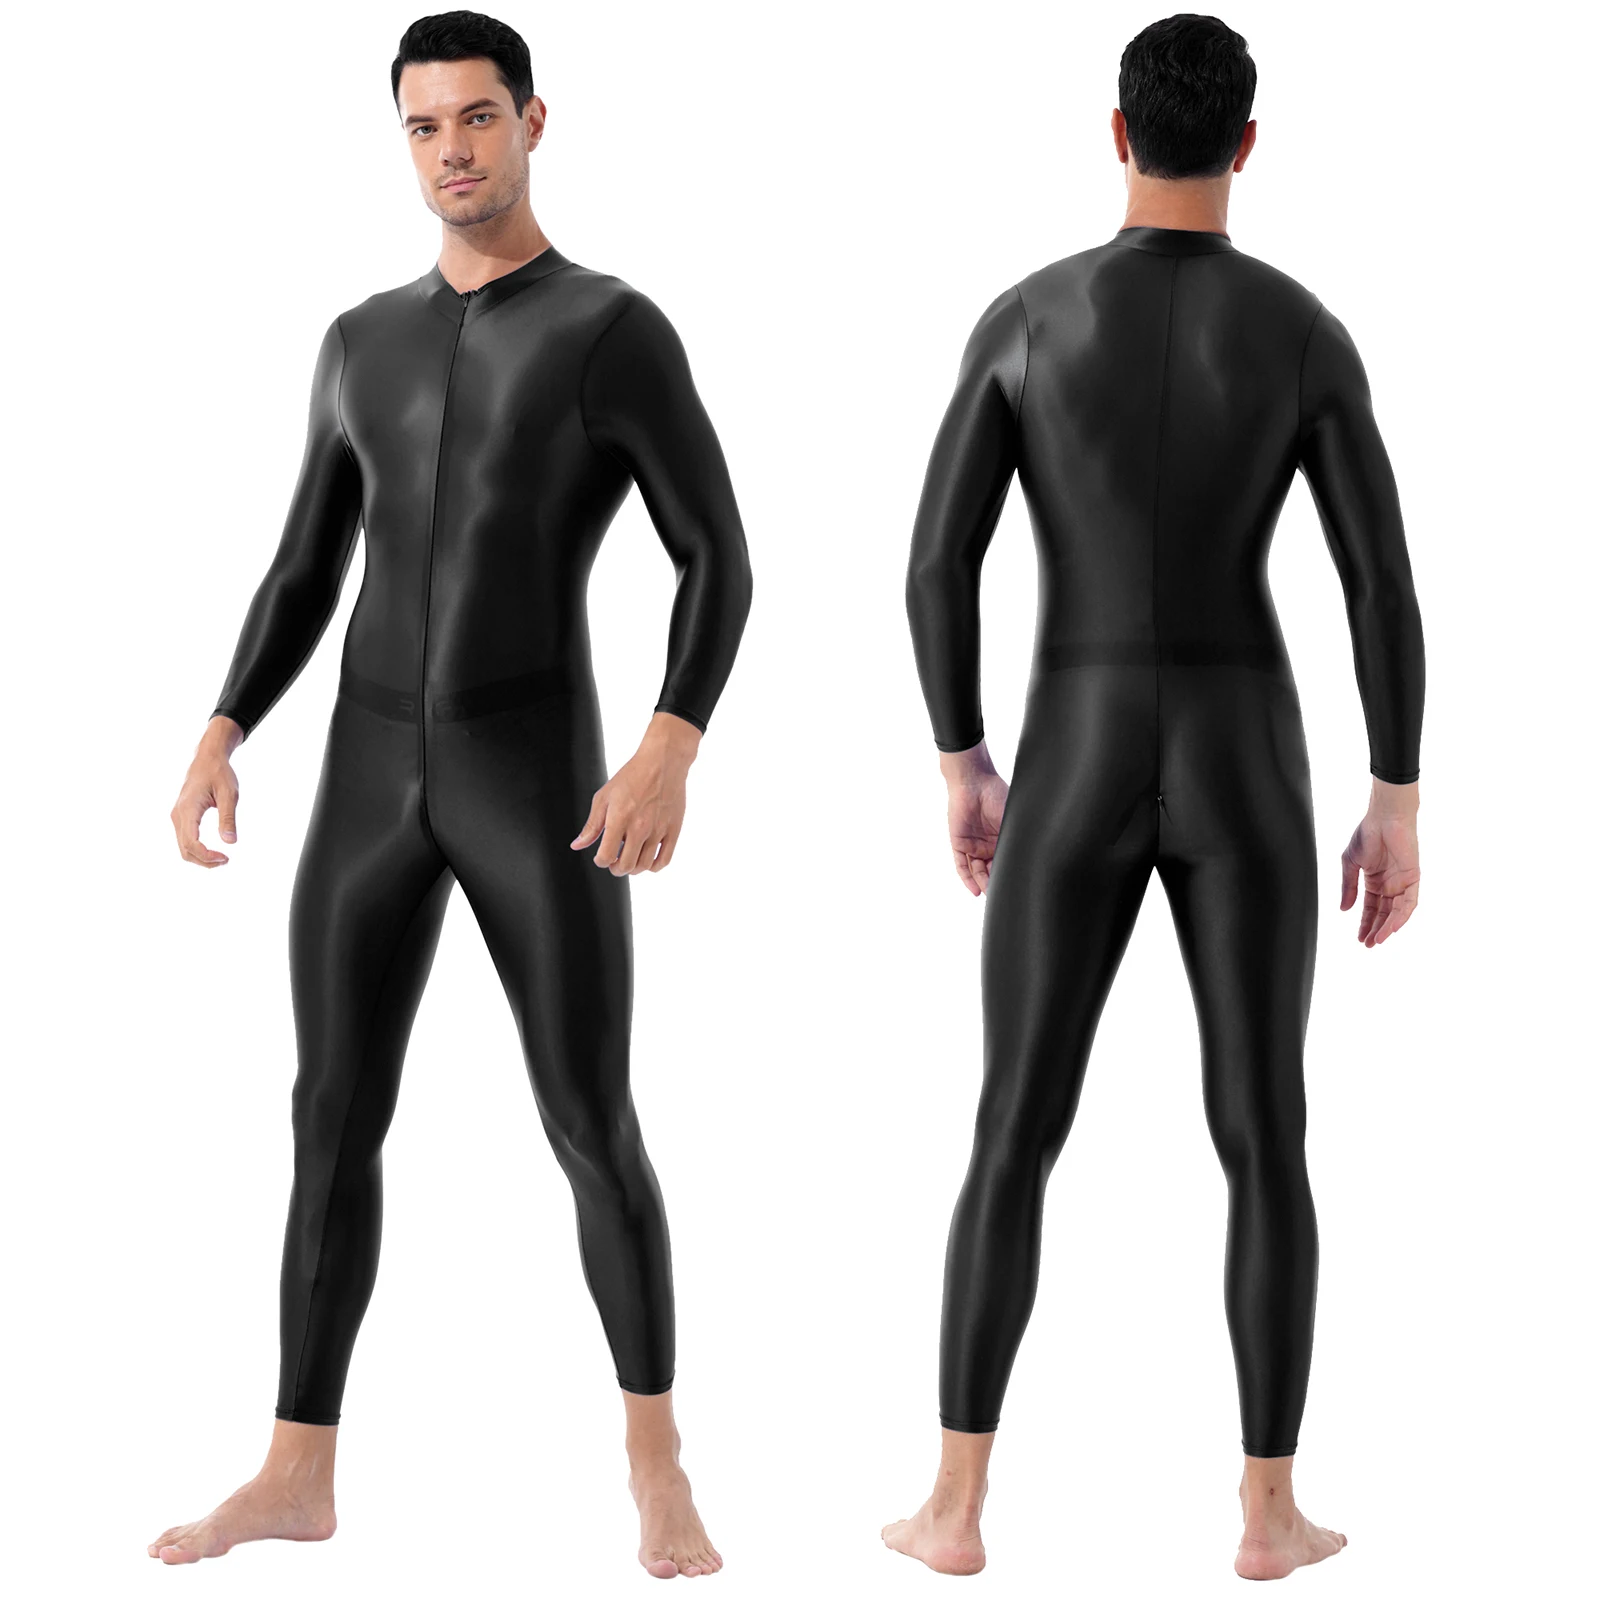 

Mens One-piece Smooth Lingerie Bodycon Rompers Oily Glossy Tights Double-ended Zipper Leotards Bodysuits Open Crotch Jumpsuits